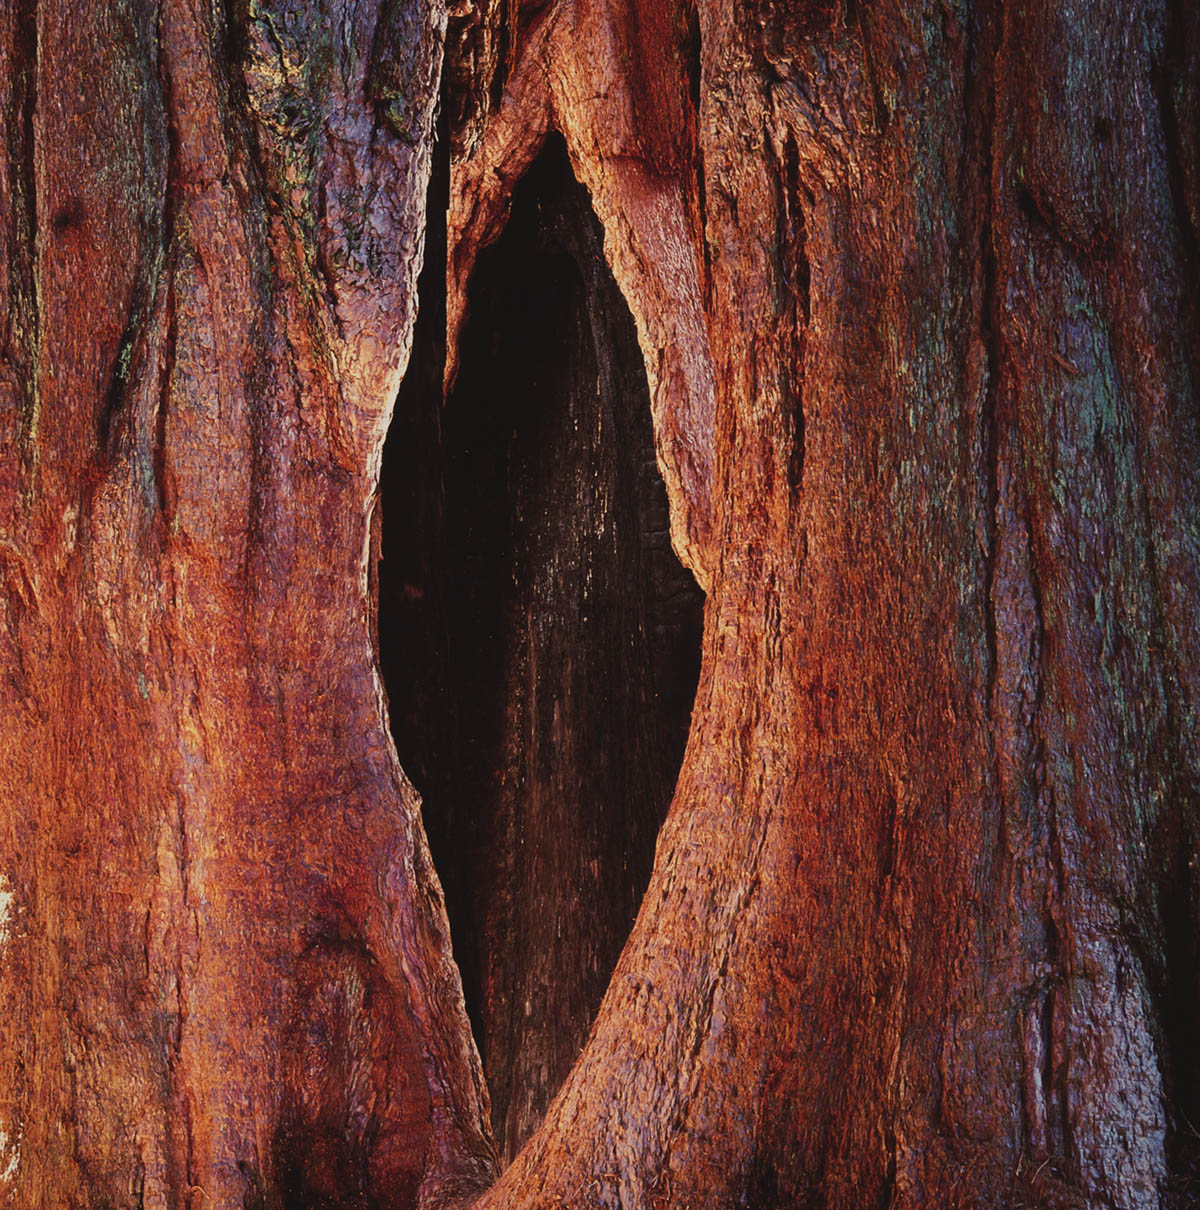 Glowing Sequoia Trunks